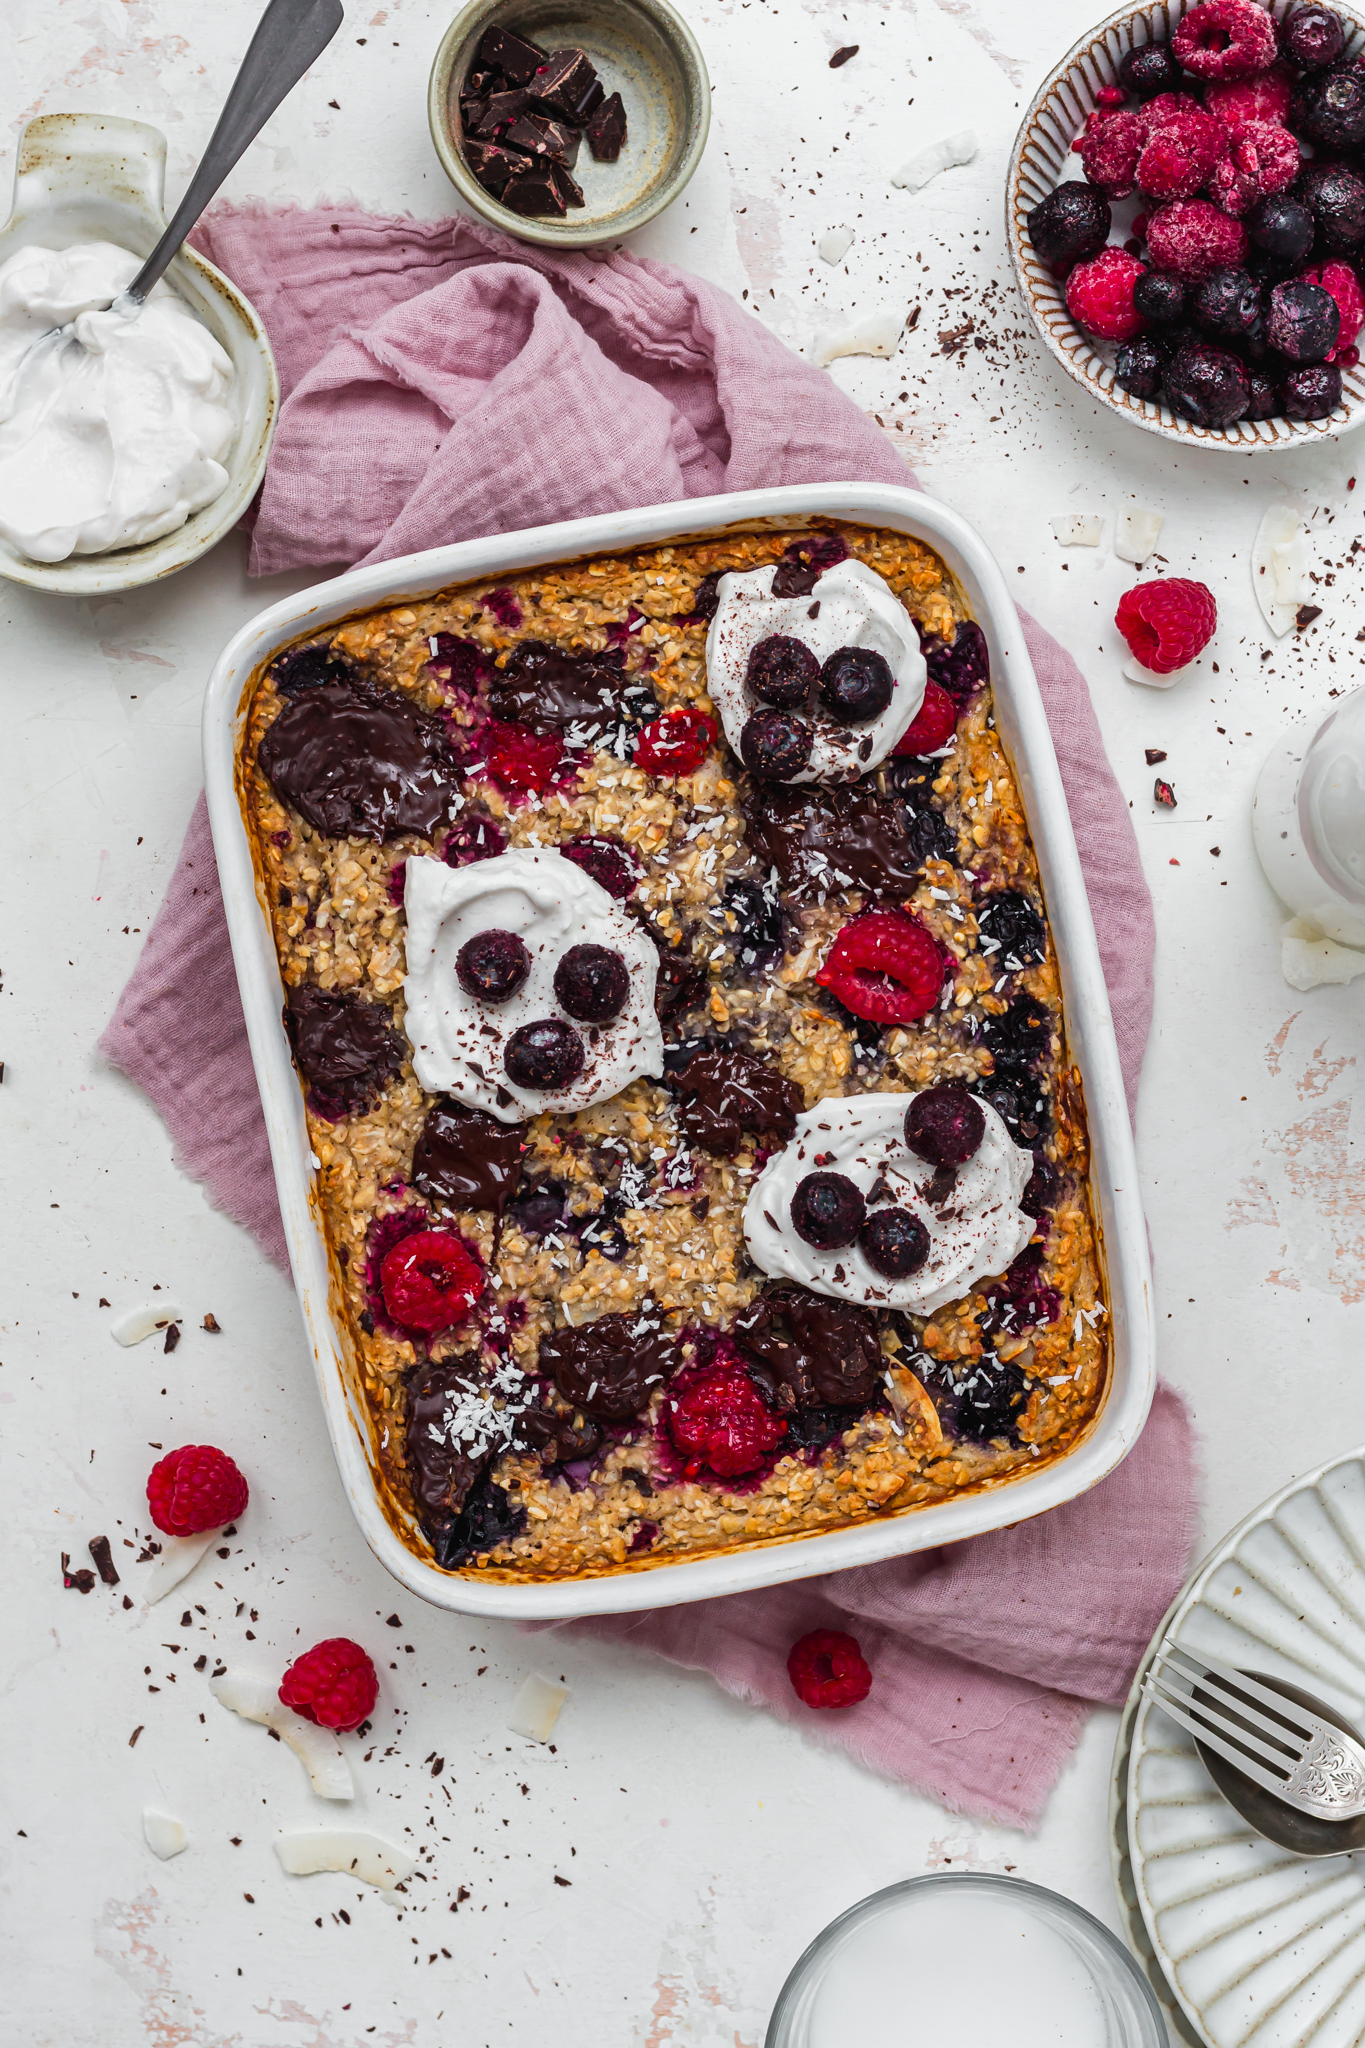 A dish of Chocolate Coconut Berry Baked Oats